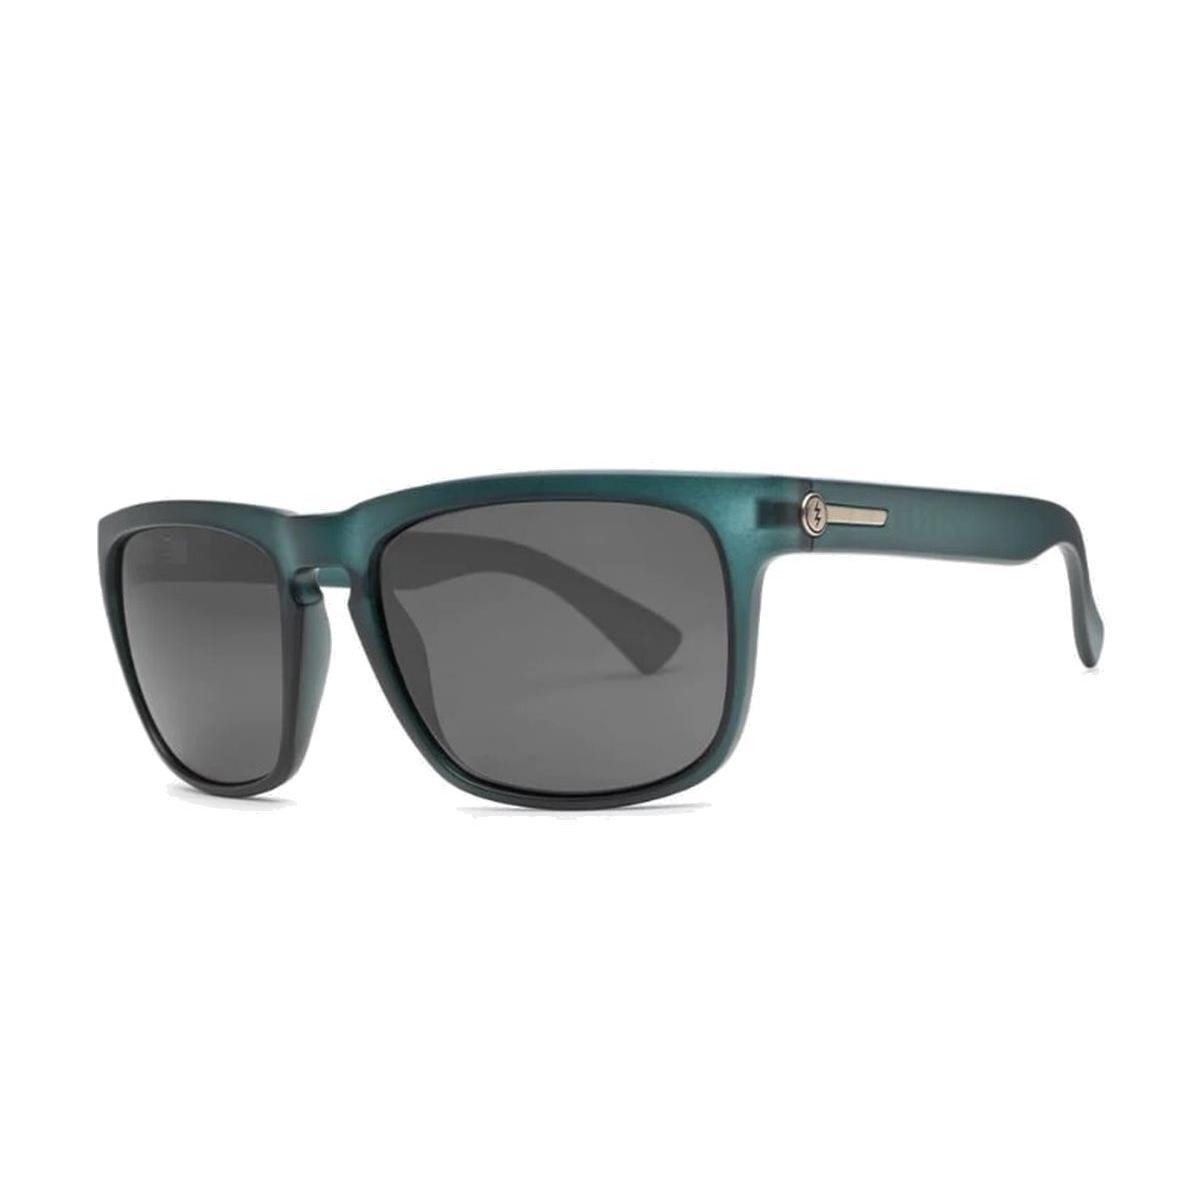 Electric Knoxville XL Sunglasses Hubbard Blue with Silver Polarized Lens - Blue Frame, Silver Polarized Lens